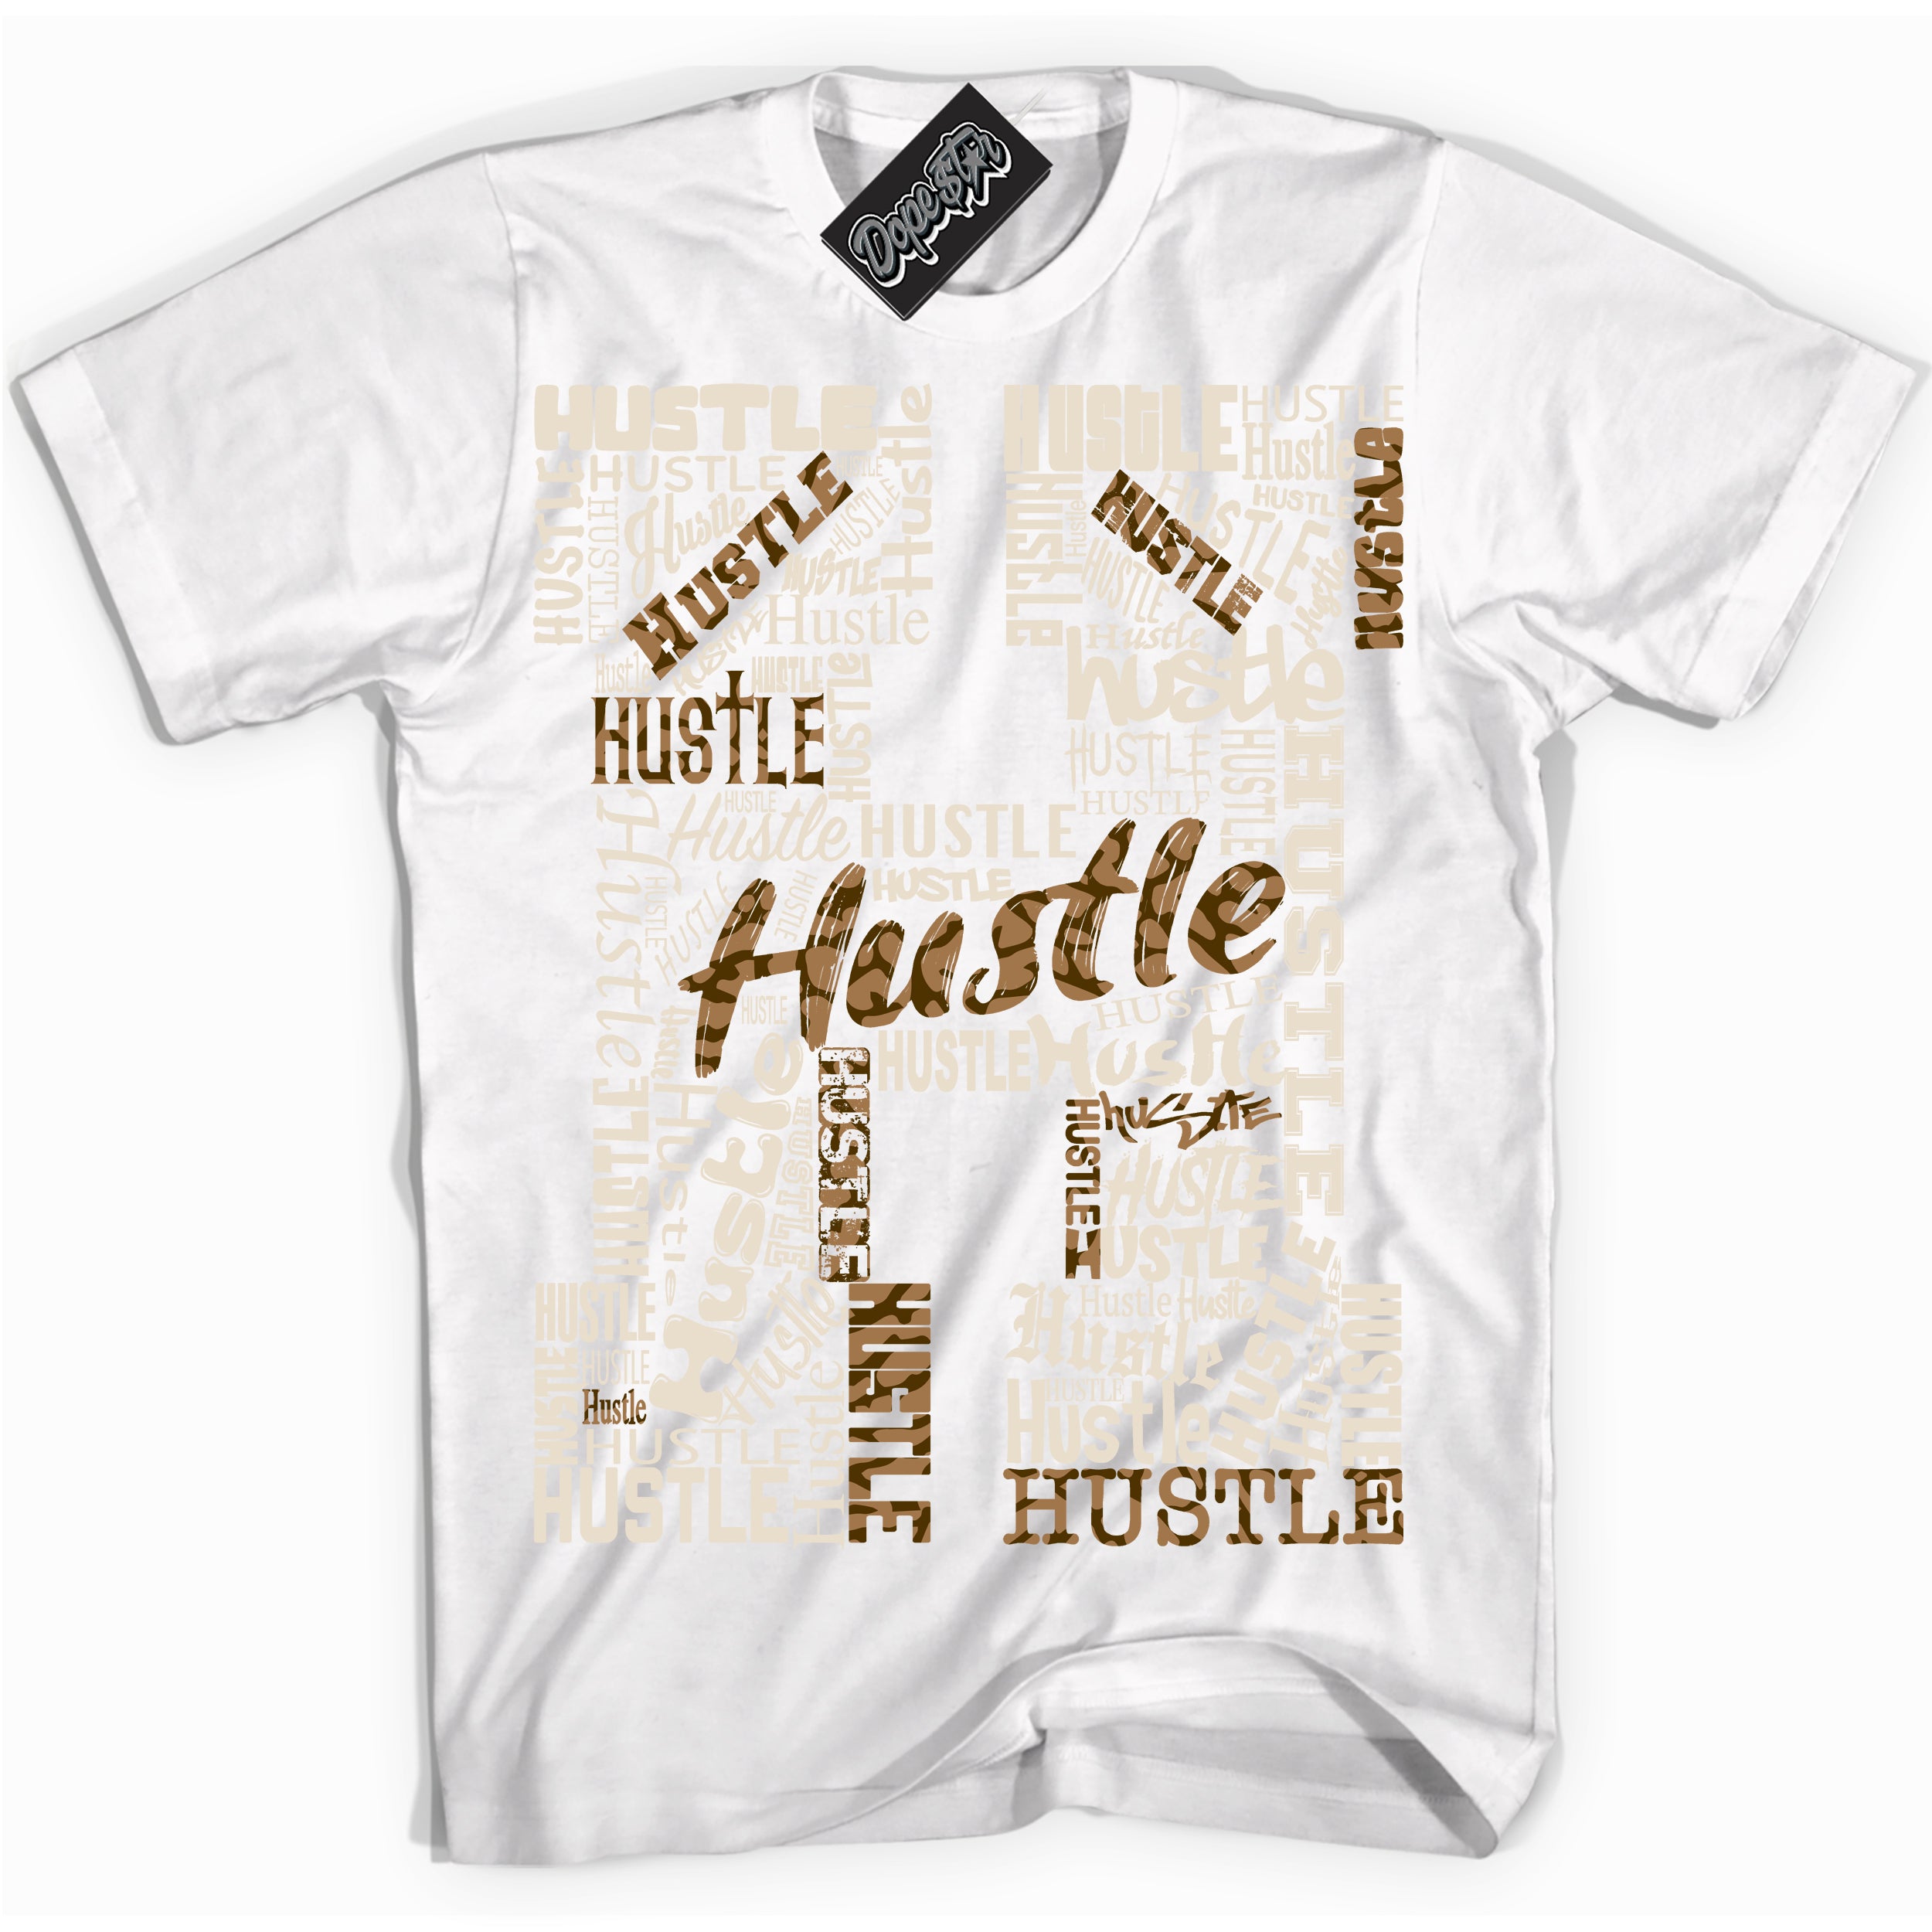 Cool White graphic tee with “ Hustle H ” design, that perfectly matches Palomino 3s sneakers 